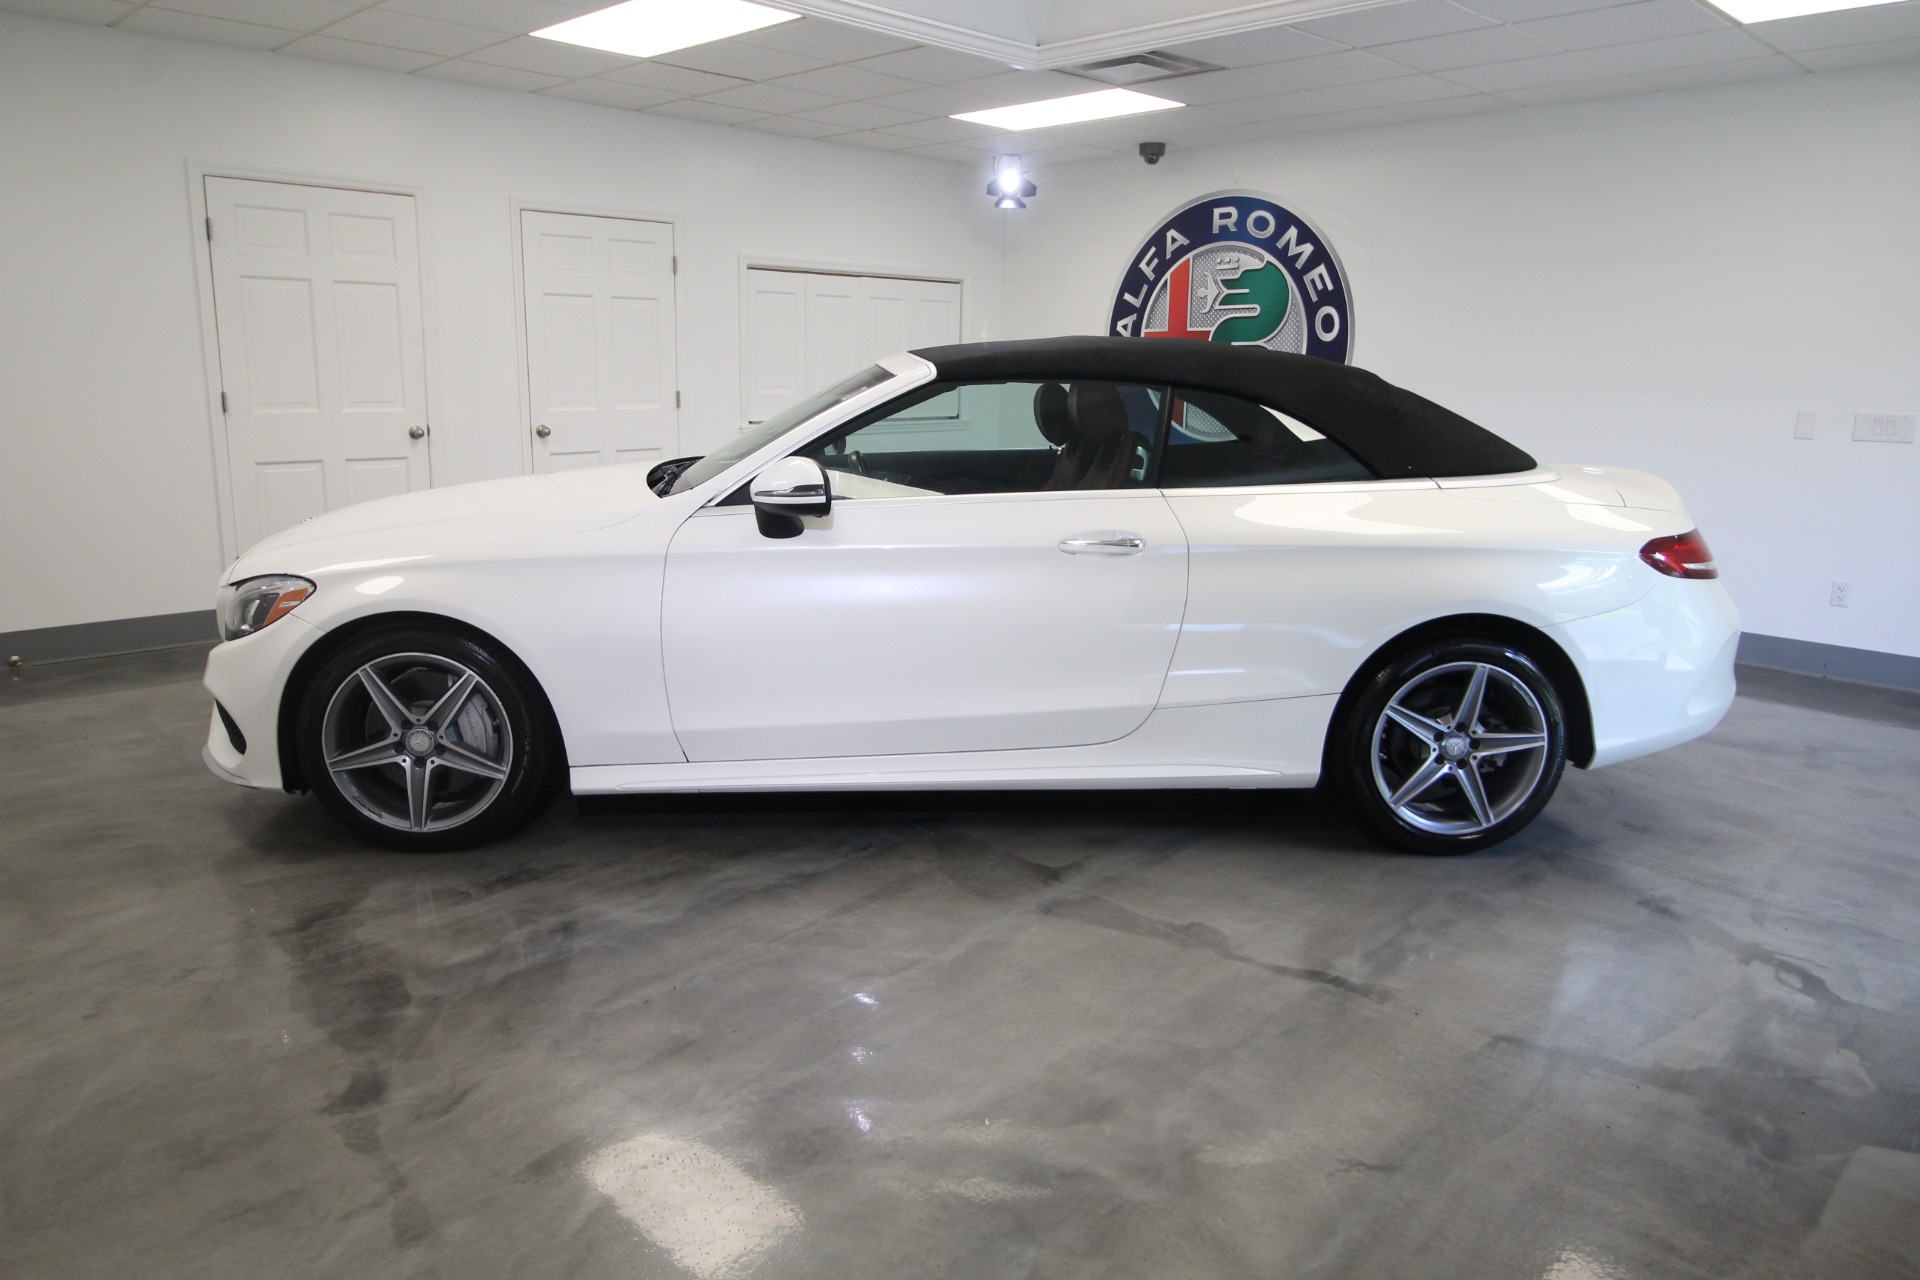 Used 2017 Polar White Mercedes-Benz C-Class C300 4MATIC CONVERTIBLE | Albany, NY